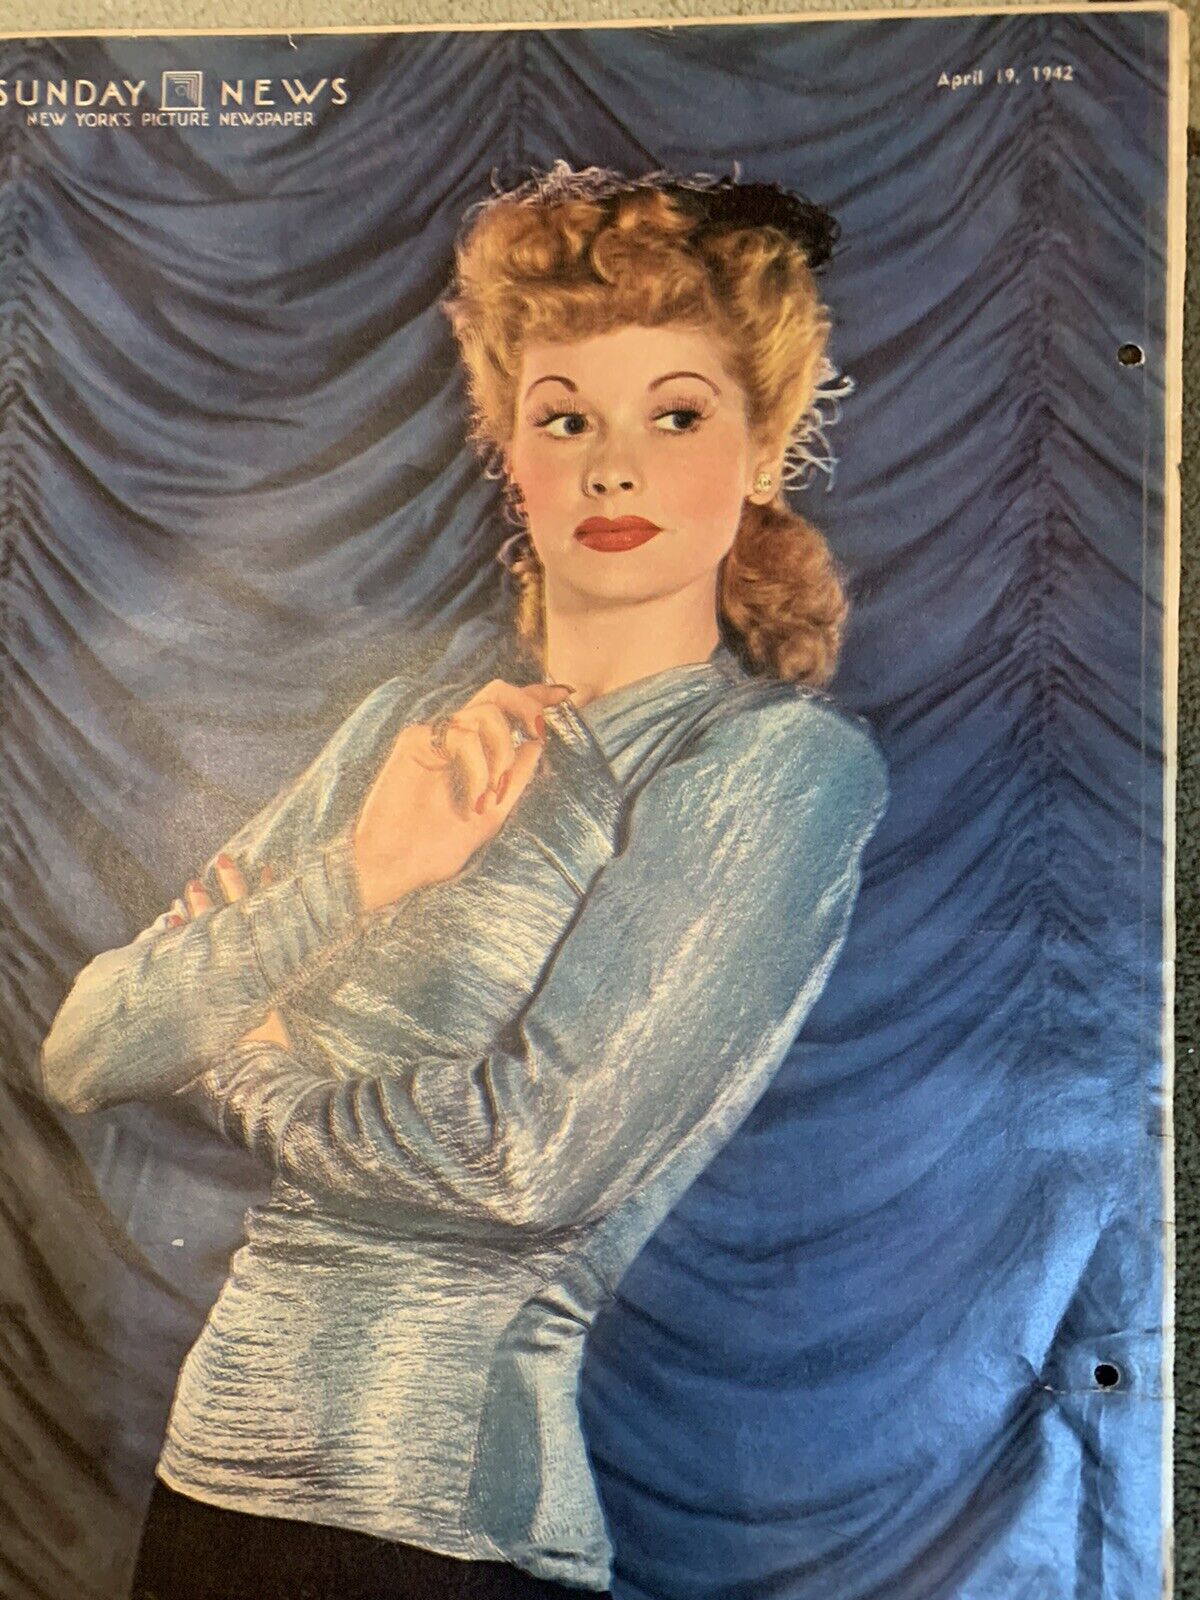 LUCILLE BALL 1942 April 19 NEW YORKS PICTURE NEWSPAPER SUNDAYS NEWS